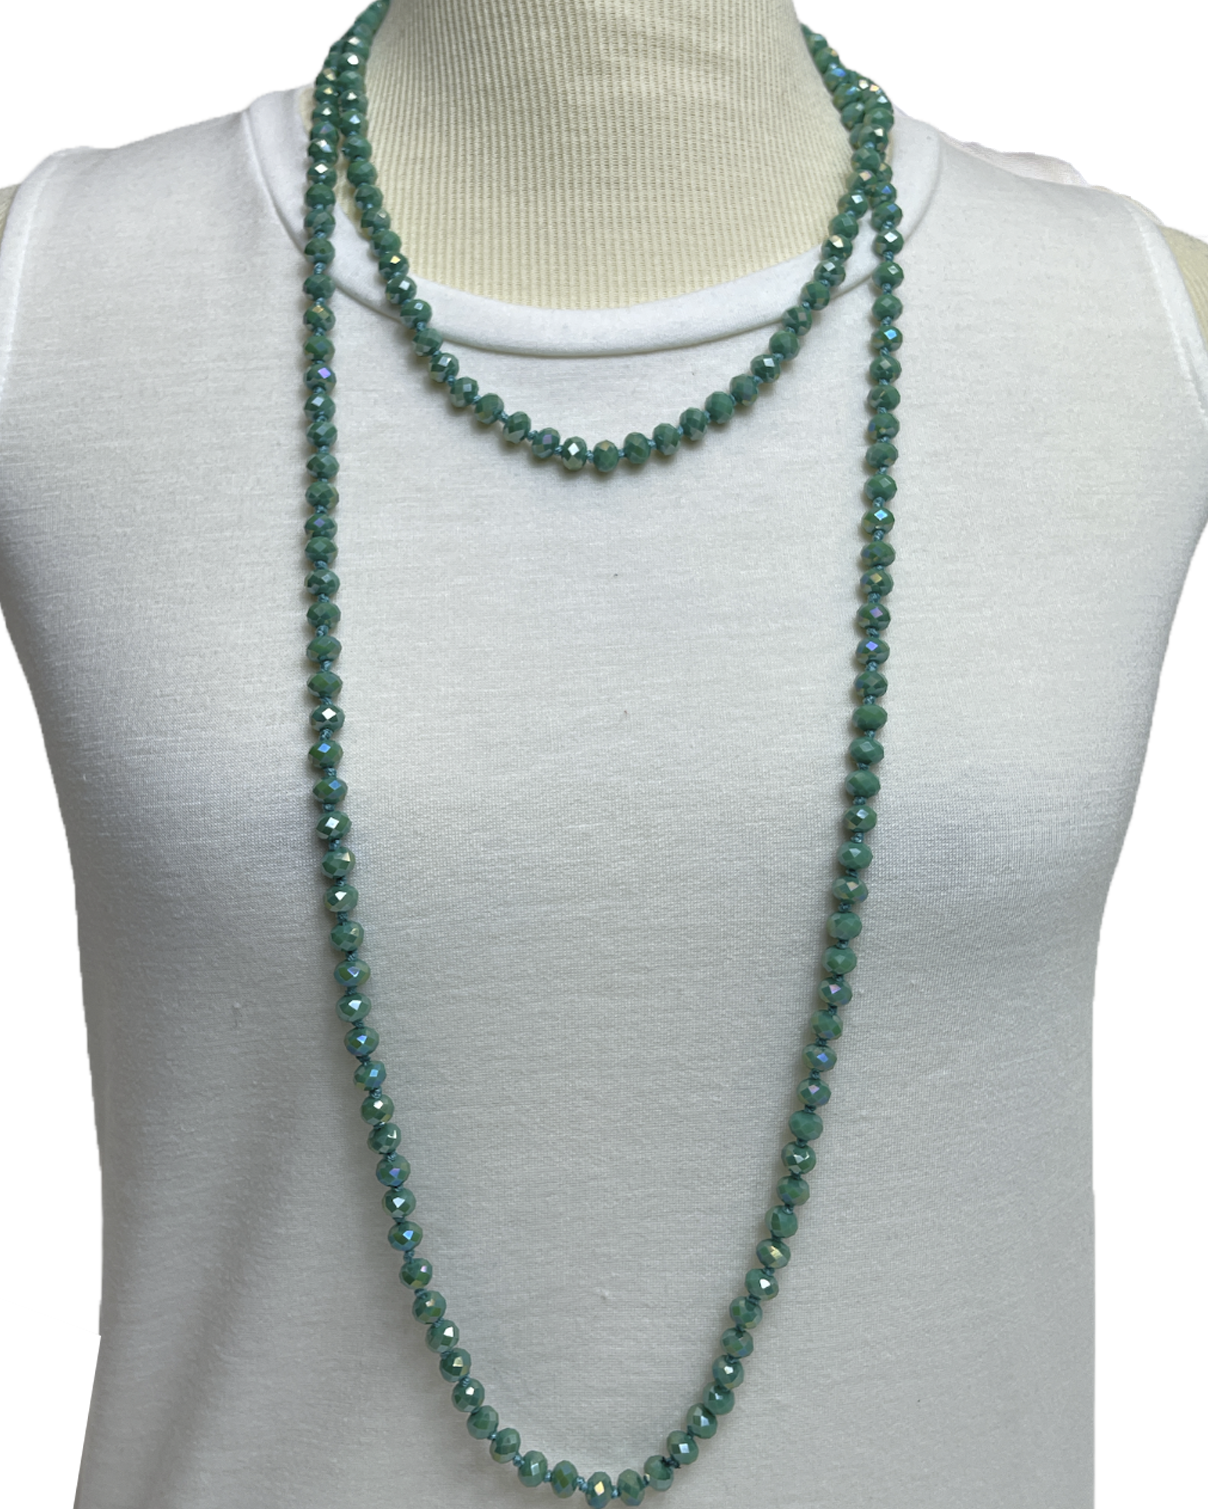 NK-2244 WESTERN TURQ 60 hand knotted glass bead necklace